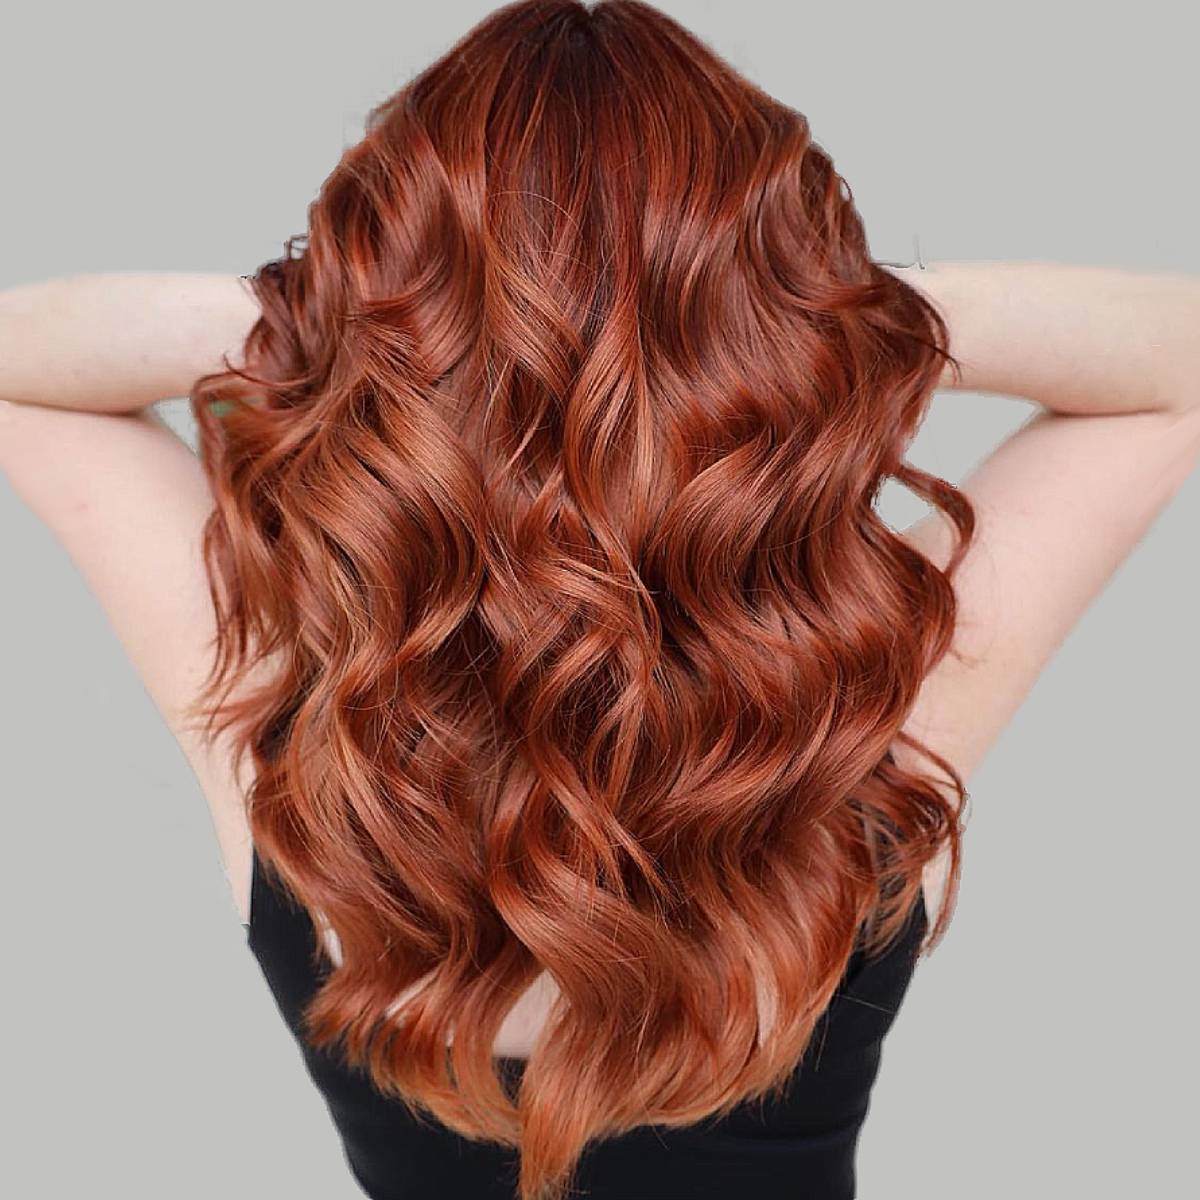 blonde and red hair color ideas